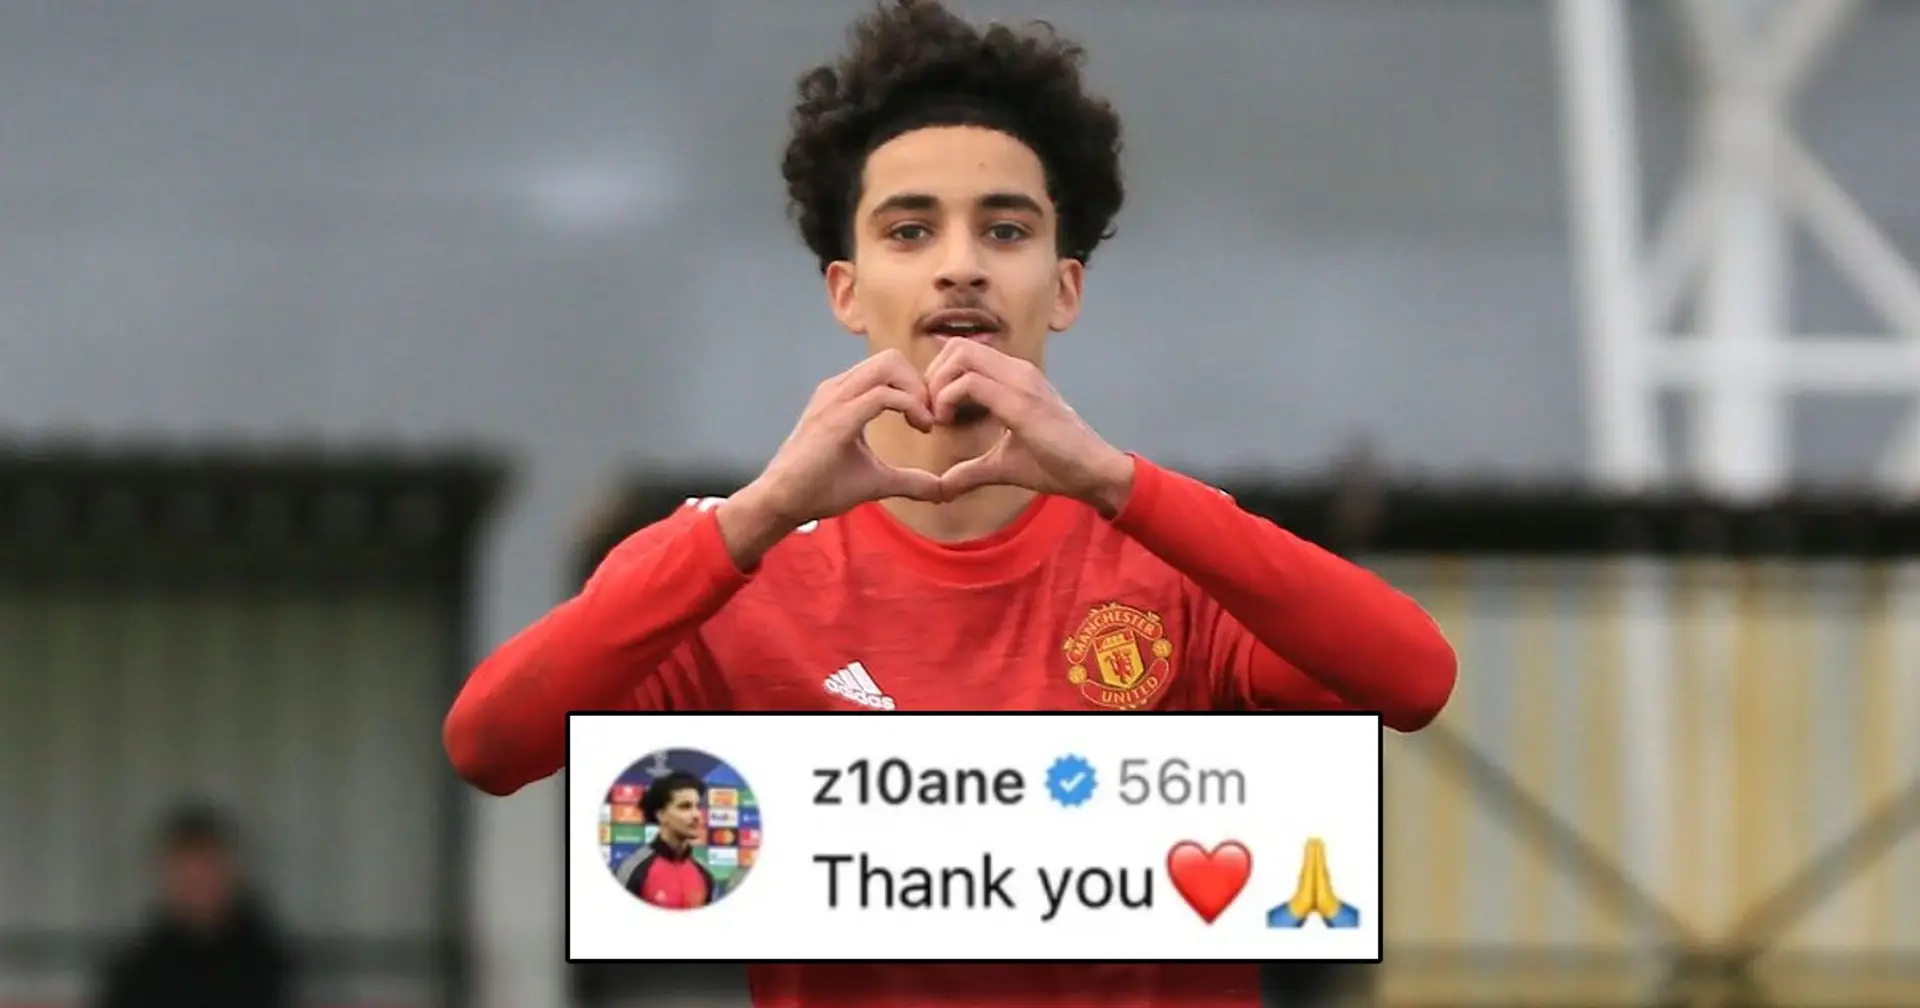 Zidane Iqbal effectively confirms move to Utrecht with grateful gesture towards Man United fans